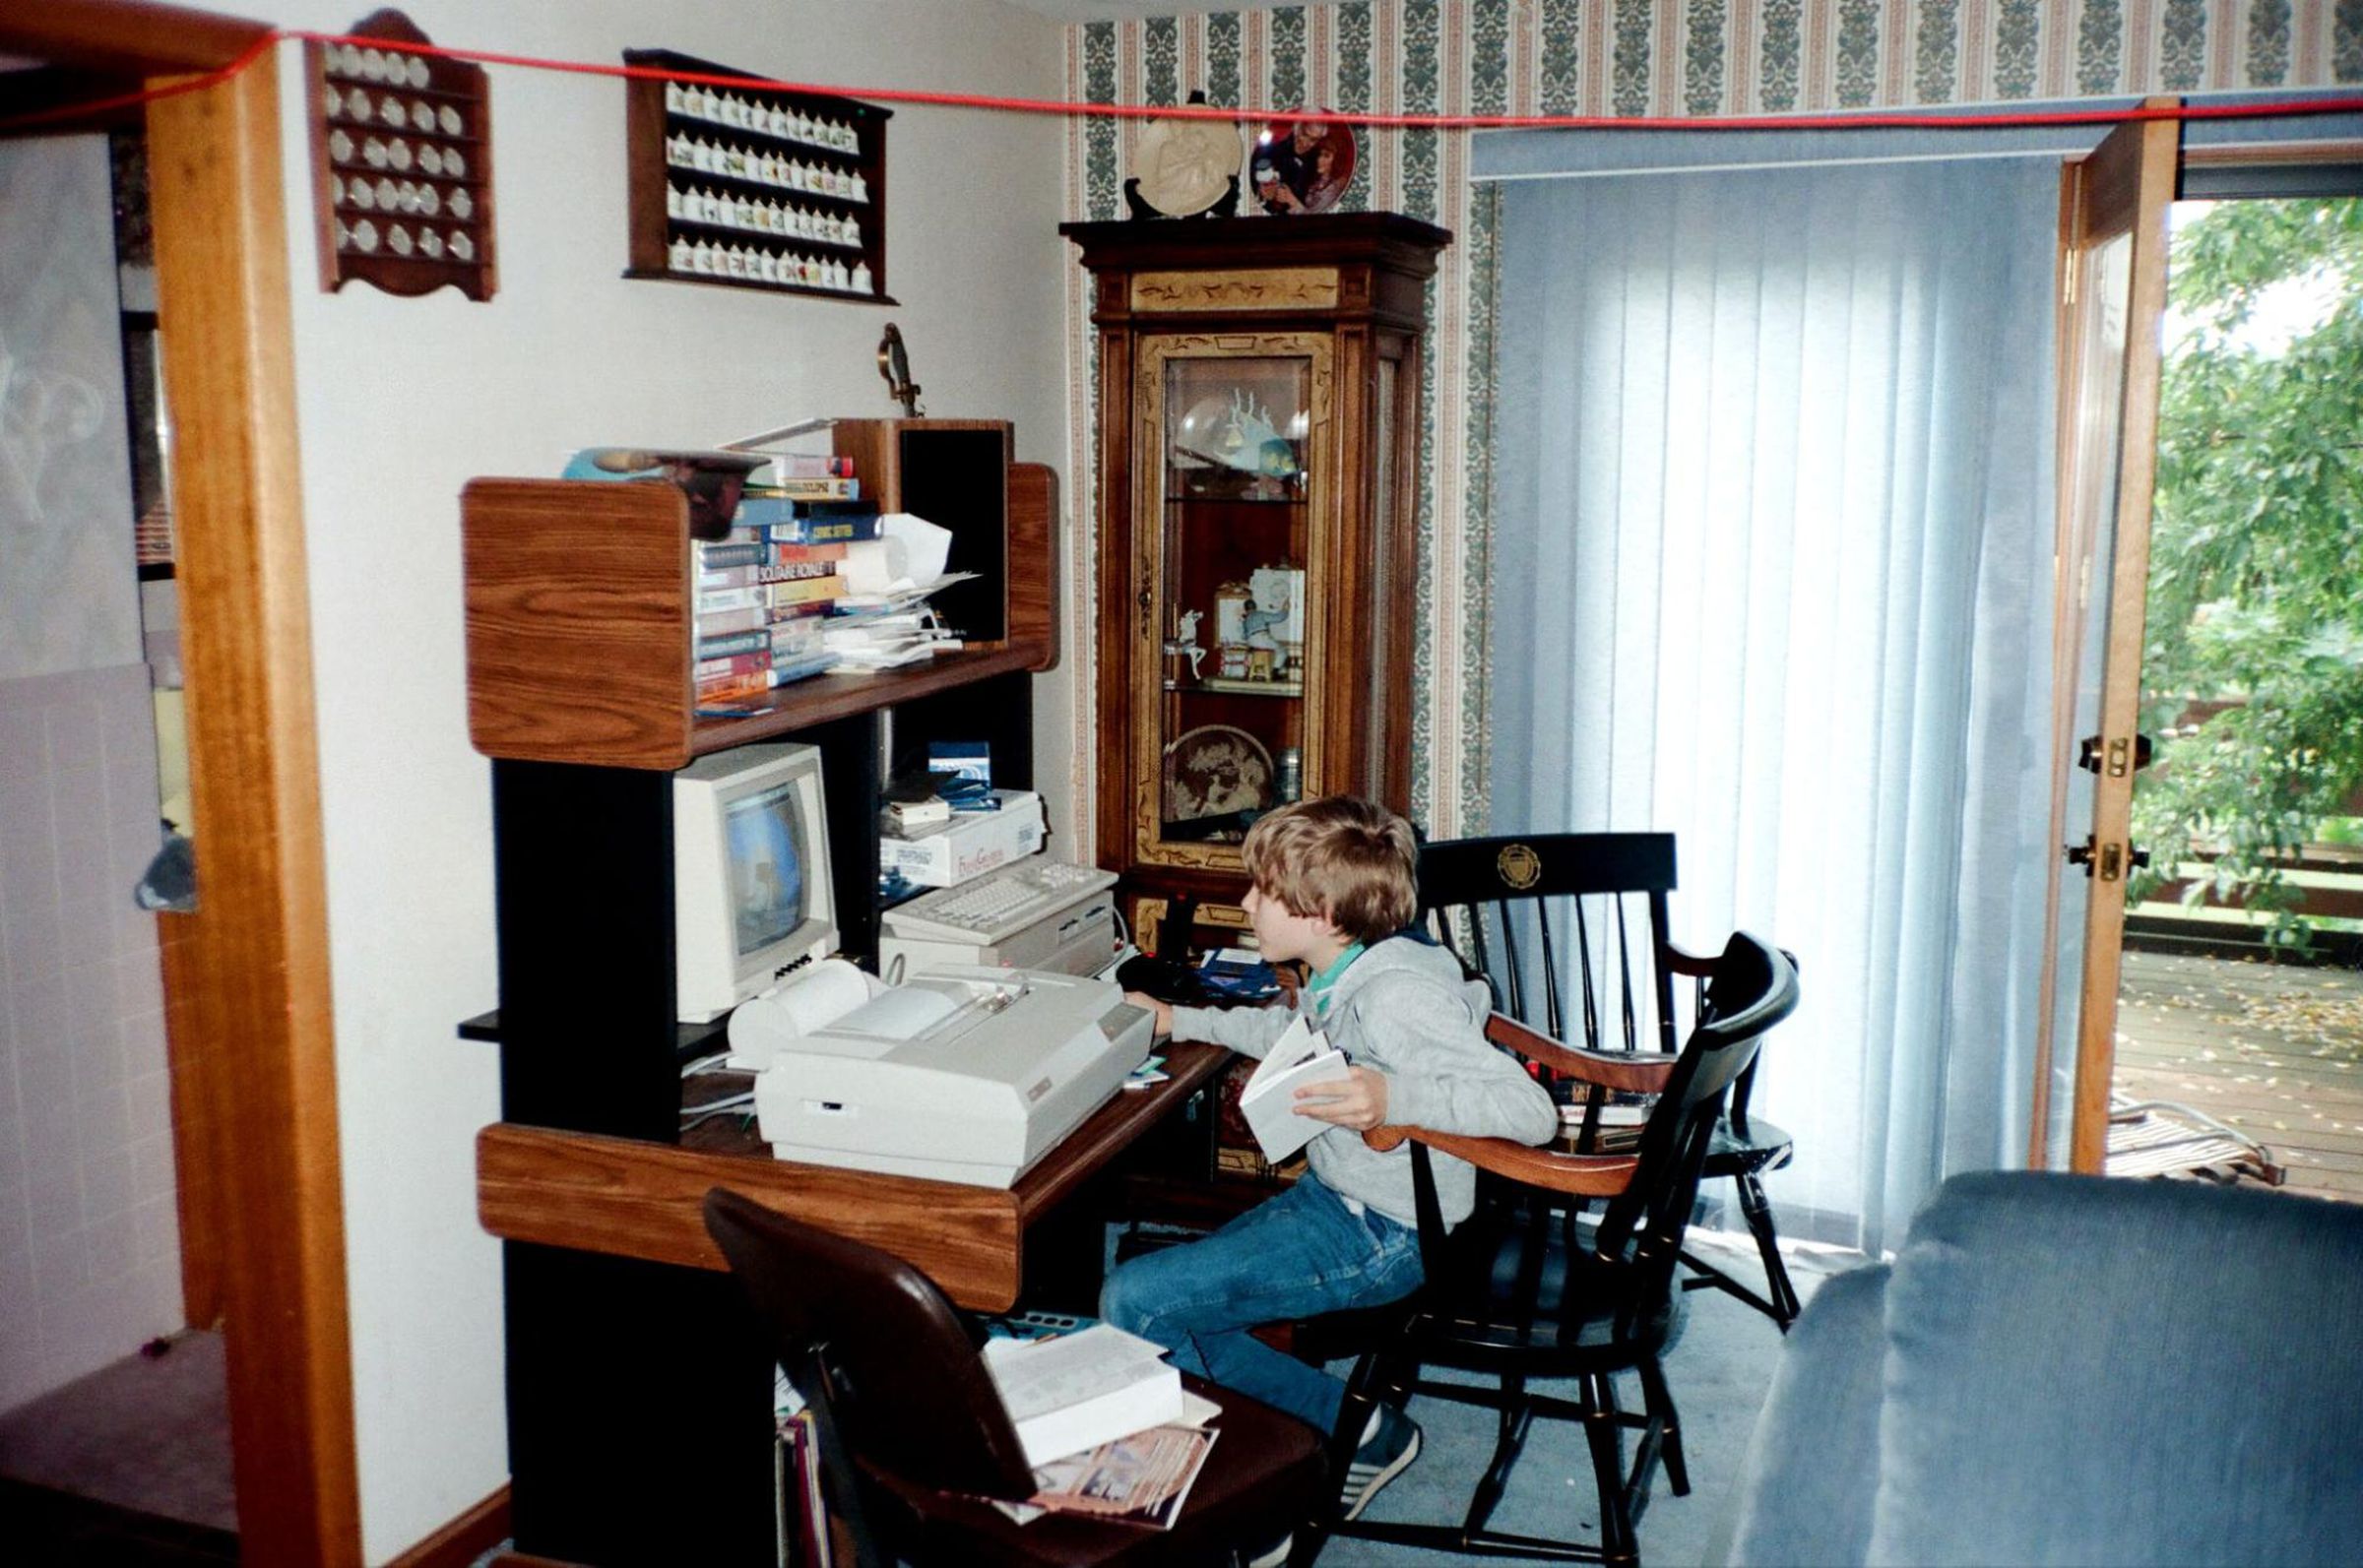 vintage image of living room with wallpaper, blue carpet, and open door to back yard. with blue cloth sofa and classic desk with computer, classic crt monitor, and printer with paper roll and kid using the computer.